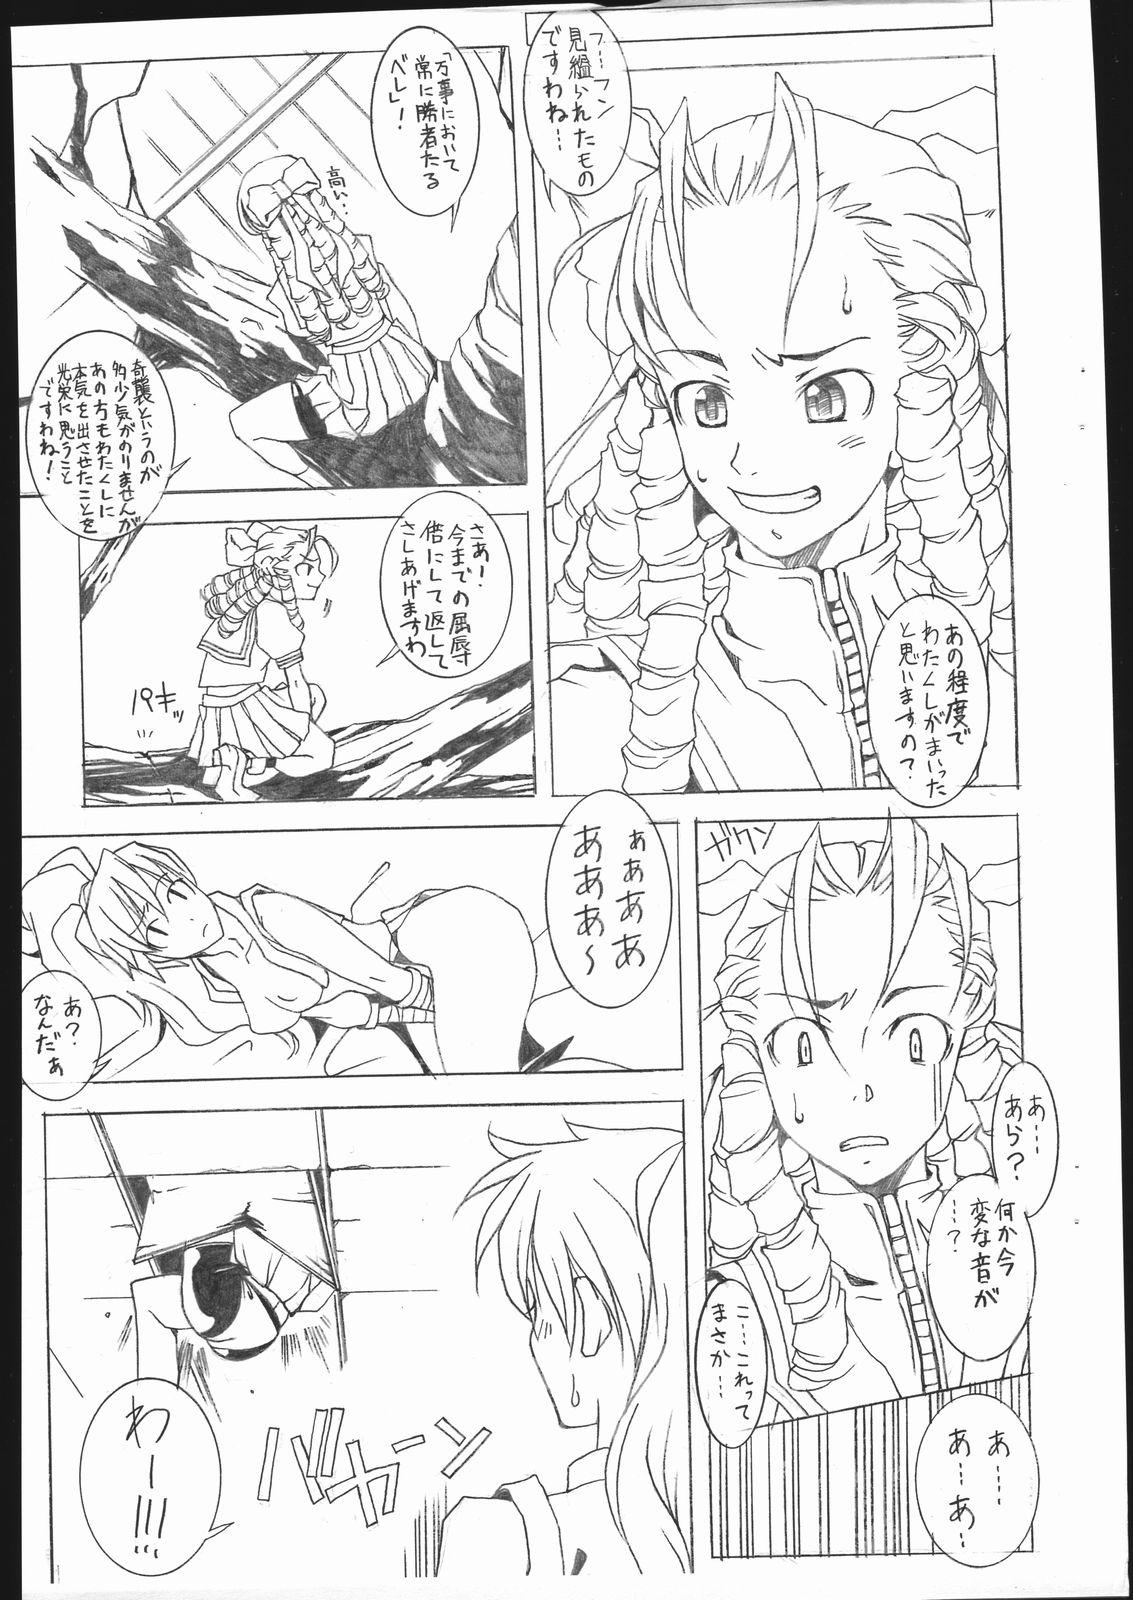 Gros Seins M&K - Street fighter Final fight Stretching - Page 7